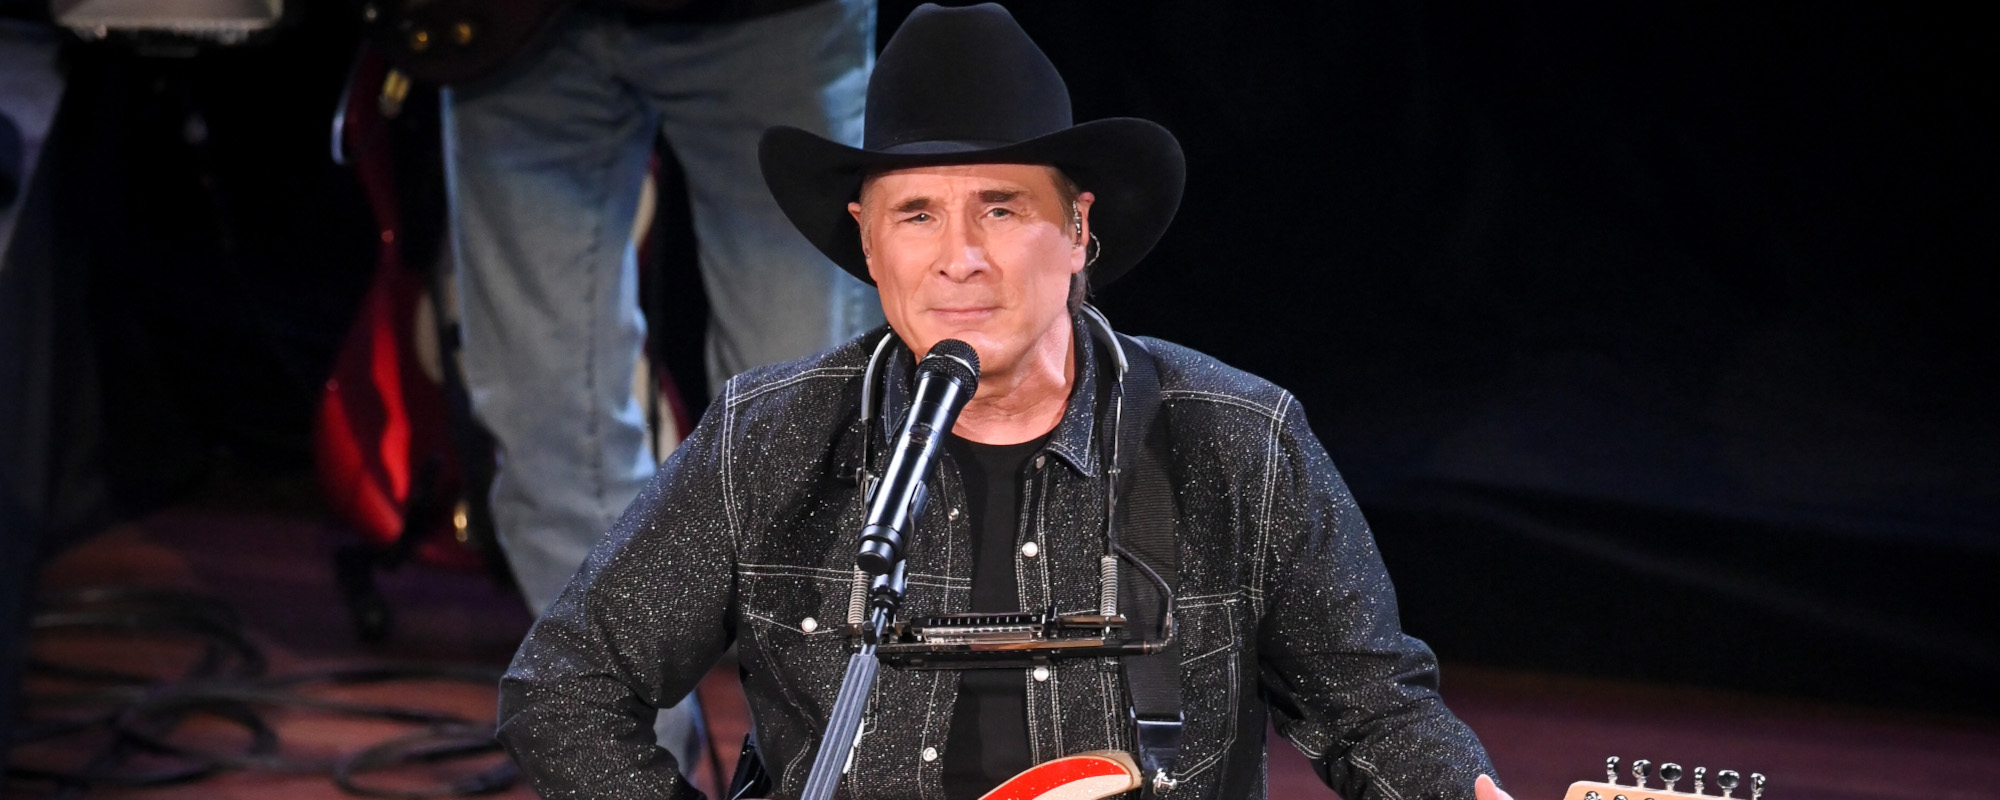 Clint Black’s Emotional Reaction to Receiving ACM Honors: “I Can’t Help but Take it to Heart”